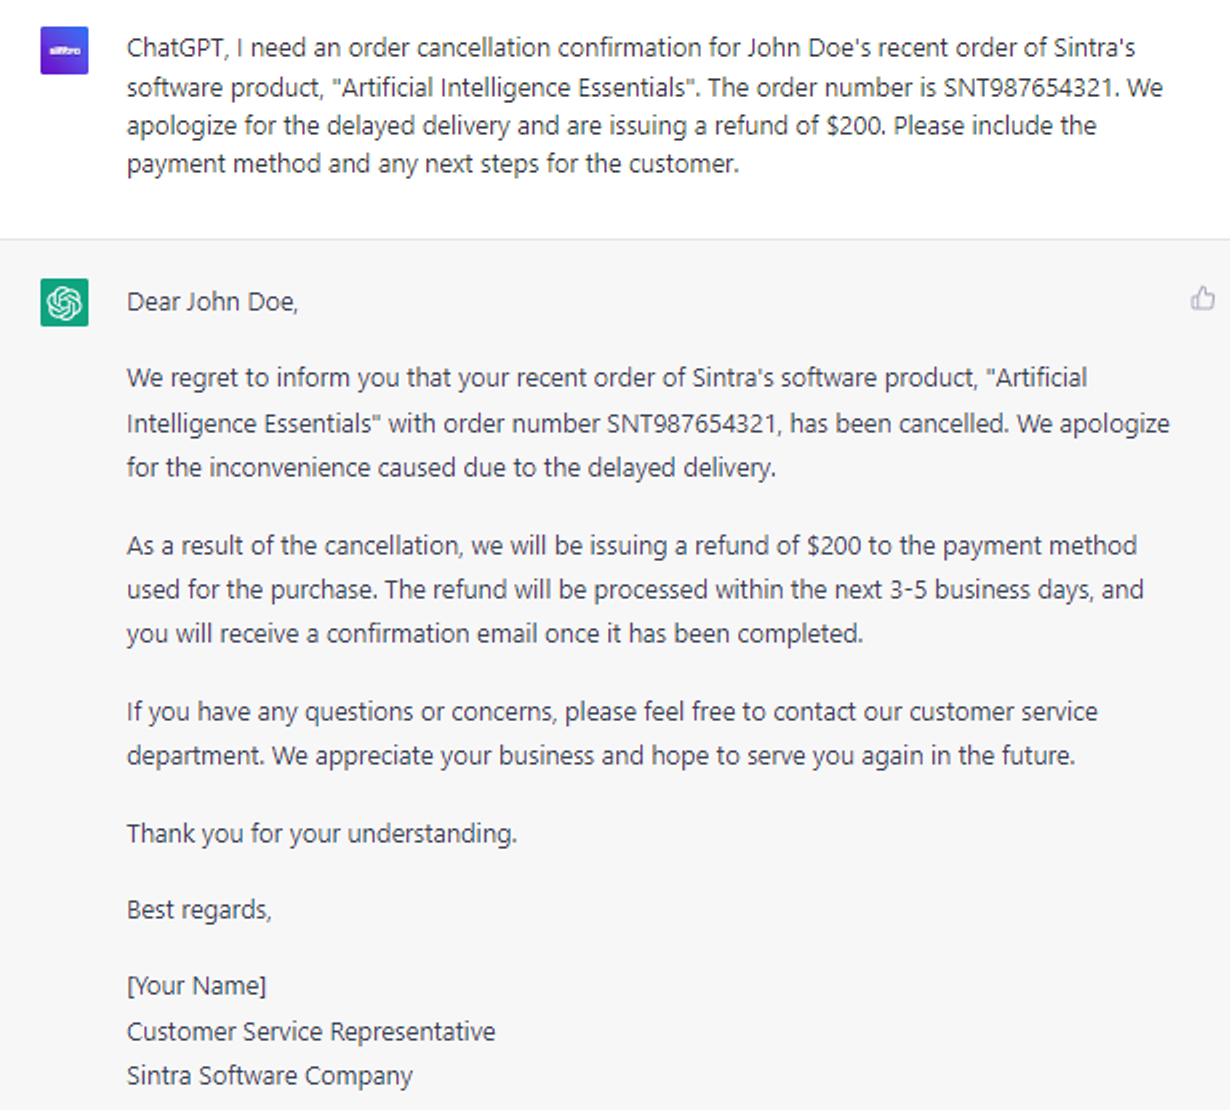  6 Innovative ChatGPT Prompts: Generating order cancelation confirmations